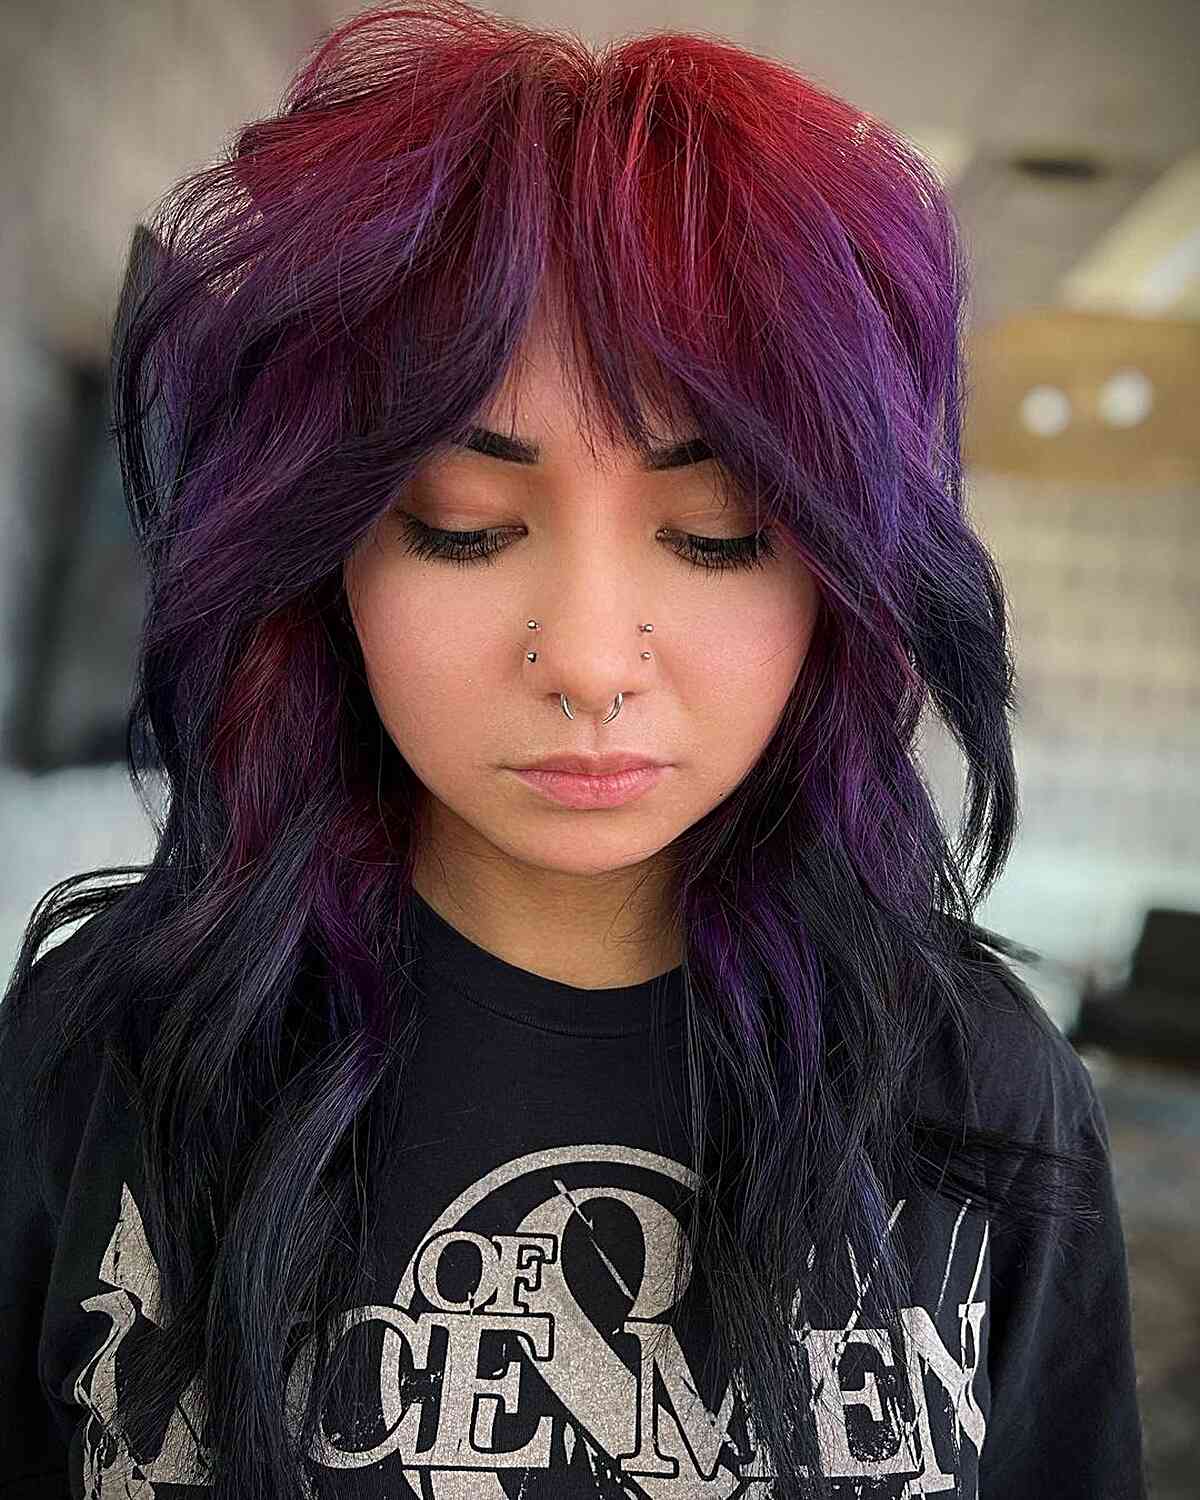 Vampire-Inspired Black, Purple, and Red Hair Color Ideas